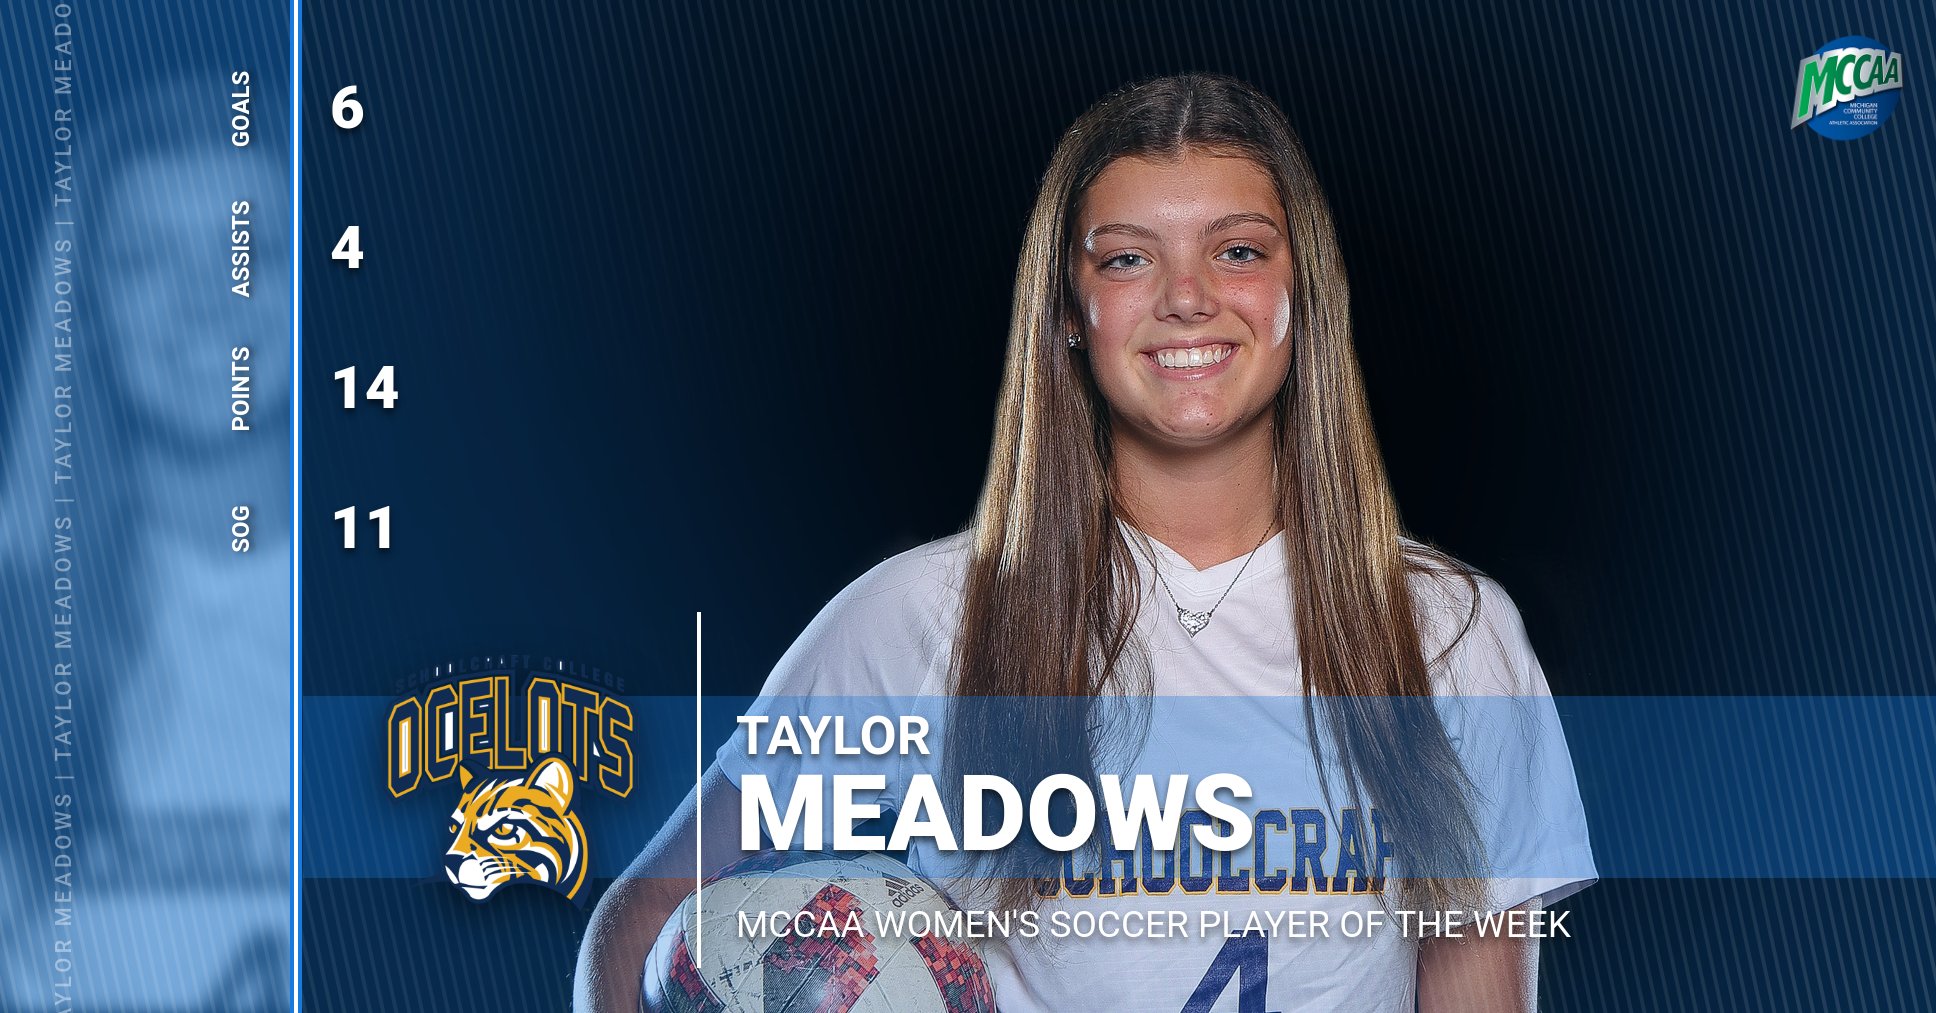 Taylor Meadows, MCCAA Women's Soccer Player of the Week.